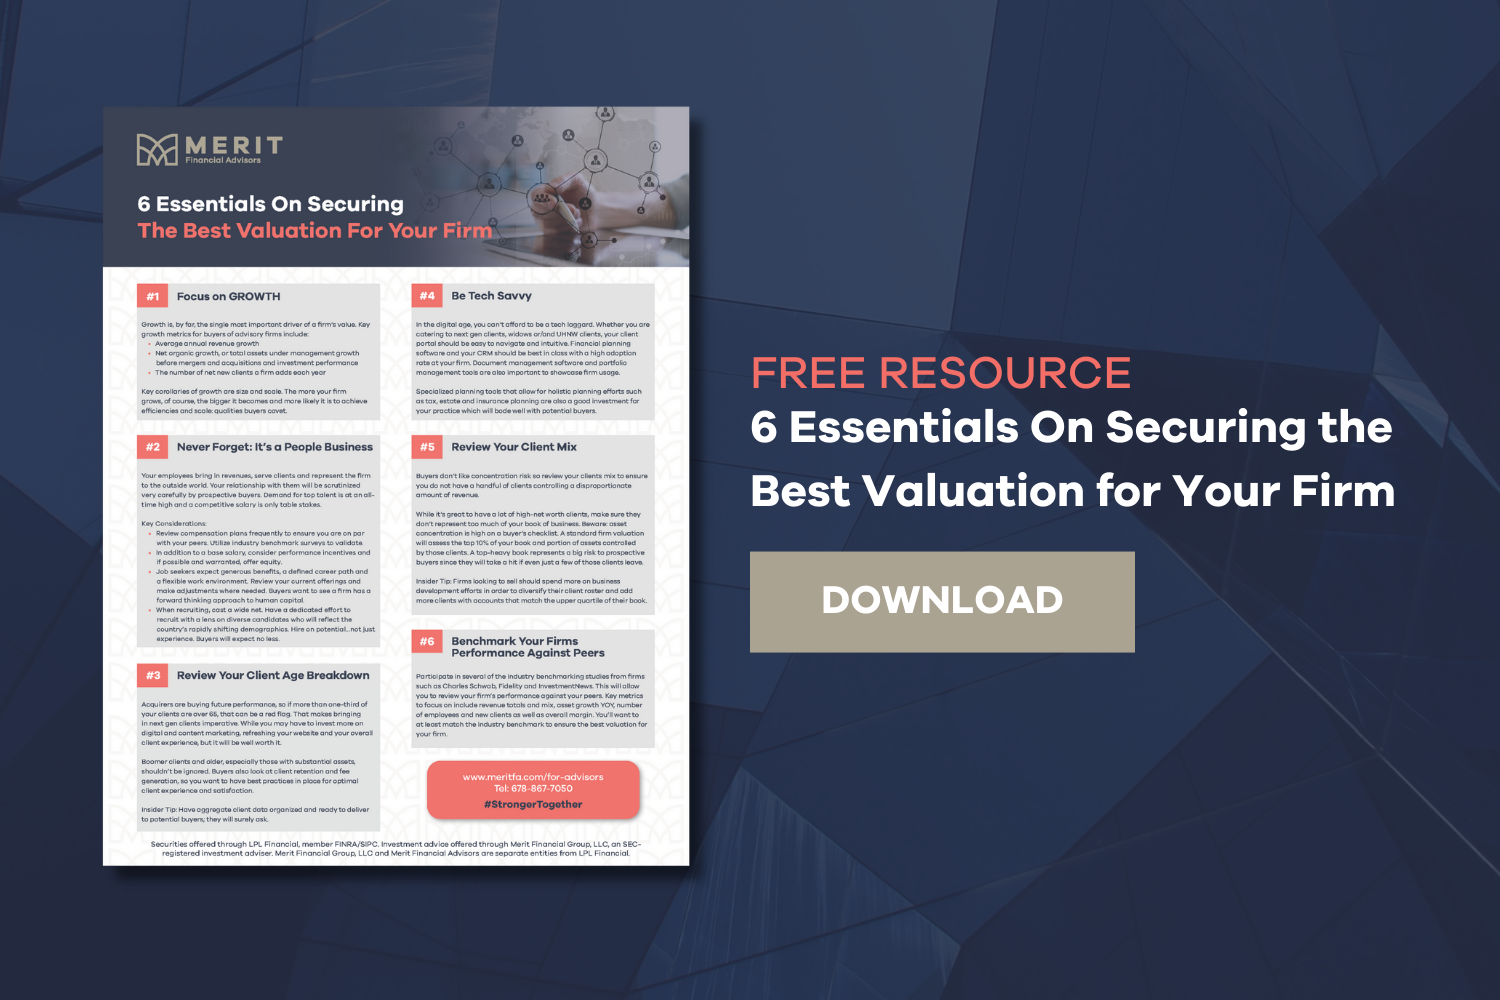 6 Essentials On Securing the Best Valuation for Your Firm